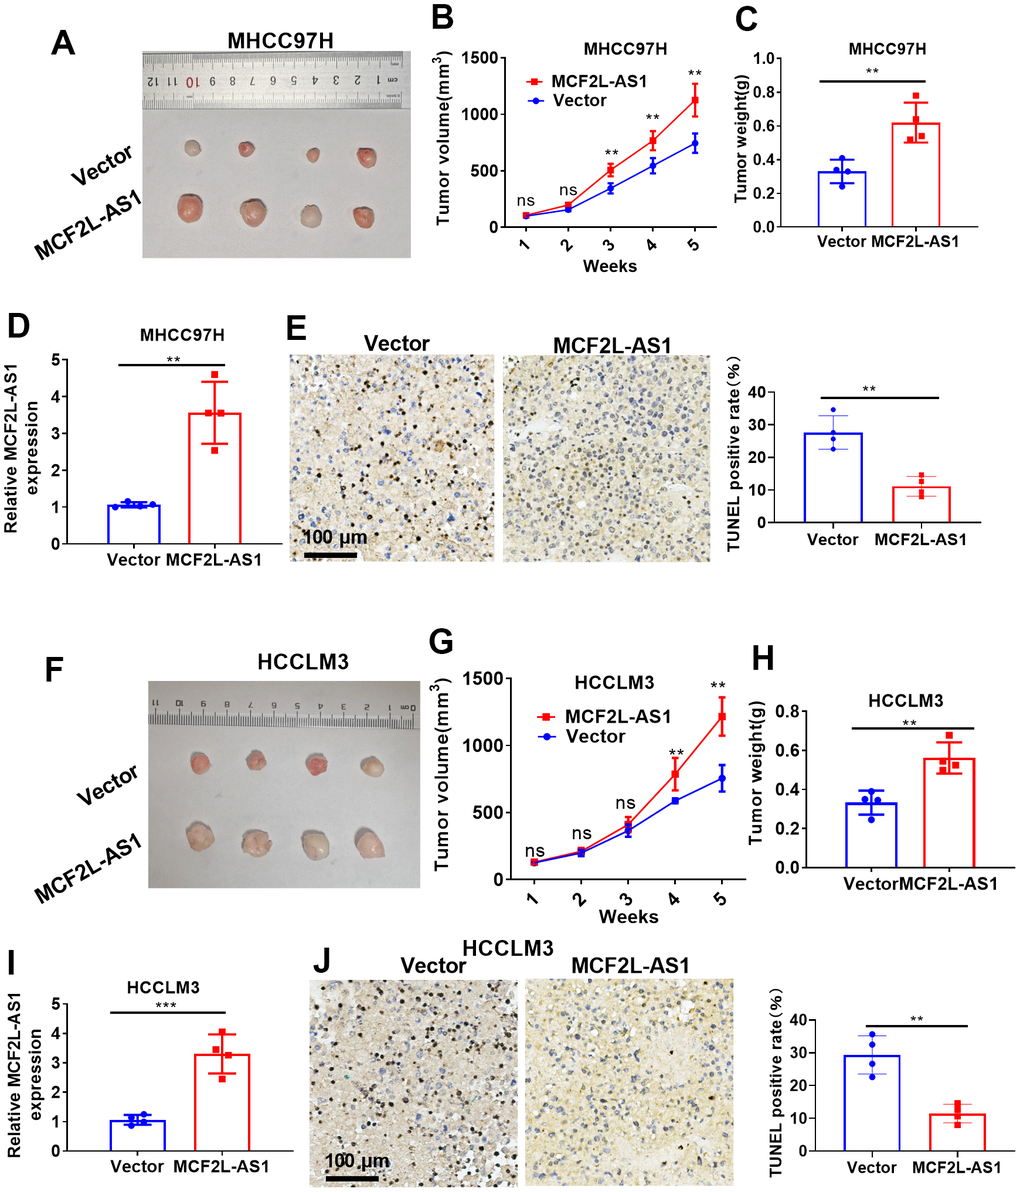 The effects of MCF2L-AS1 on HCC cell growth in vivo. MHCC97H and HCCLM3 cells were transfected along with MCF2L-AS1 overexpression plasmids and used for in vivo experiments. (A) Tumor images. (B) Tumor volume. (C) Weight of tumor. (D) RT-PCR was conducted for detecting MCF2L-AS1. (E) TUNEL staining kit was used for detecting cell apoptosis. (F) Tumor images. (G) Tumor volume. (H) Tumor weight. (I) RT-PCR was conducted for detecting MCF2L-AS1. (J) The TUNEL staining kit was used for detecting cell apoptosis. Scale bar=100 μm. Ns P>0.05, **P